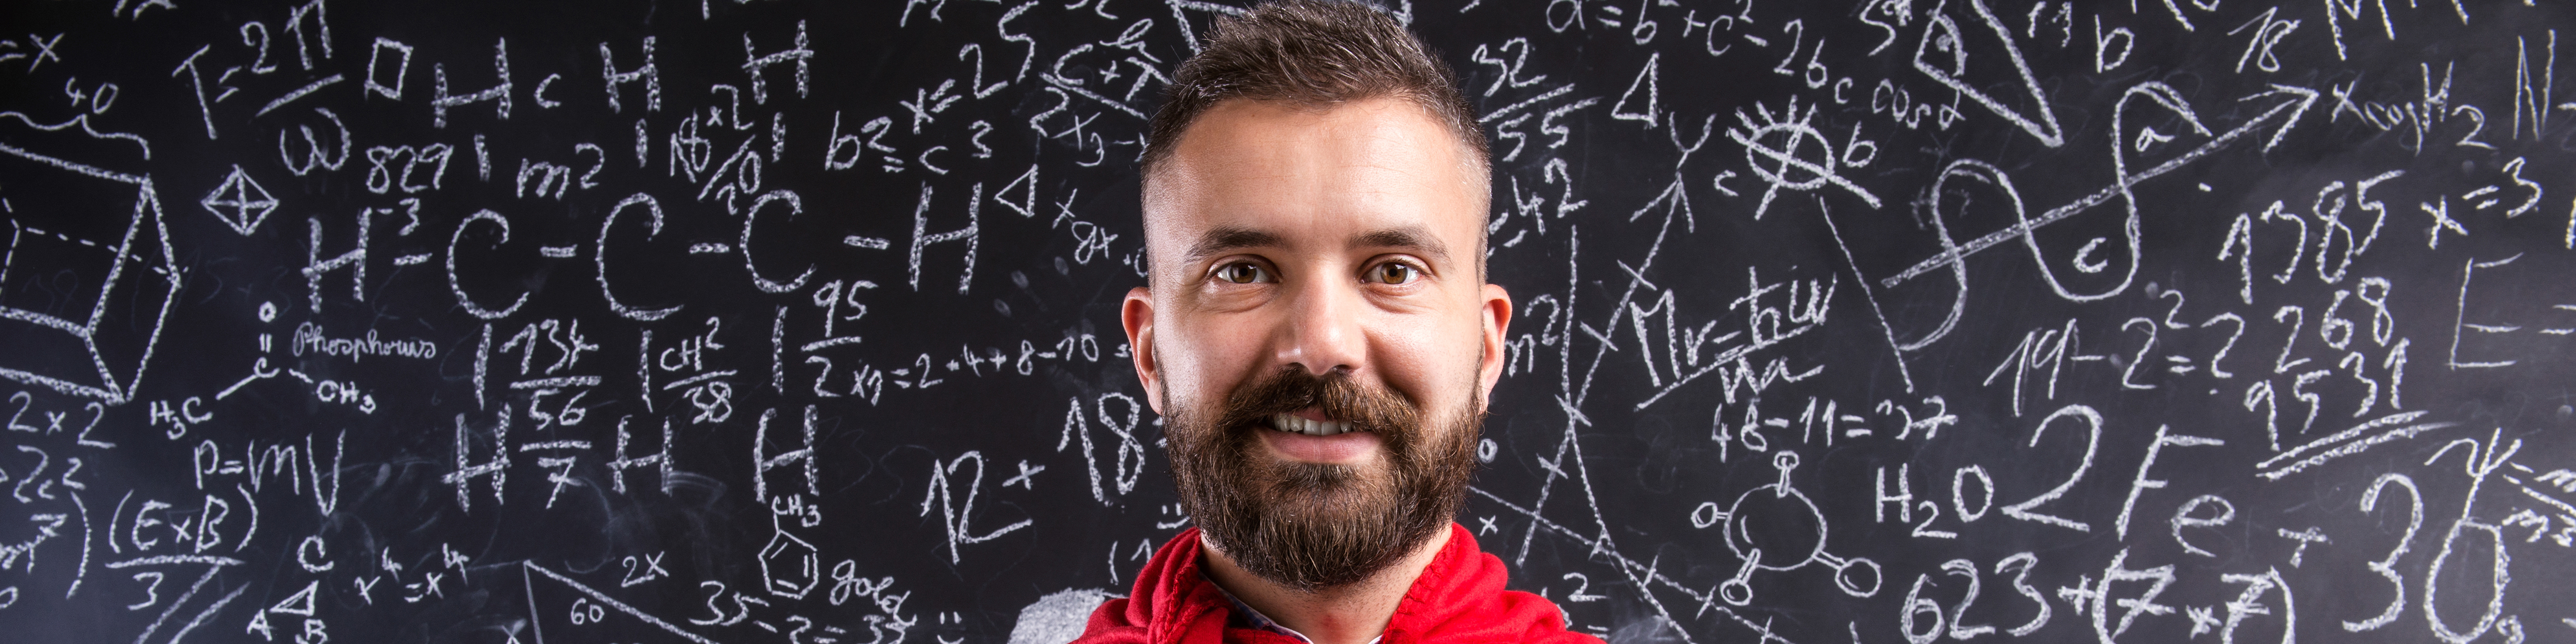 teacher in red cape standing against big blackboard with mathematical symbols and formulas